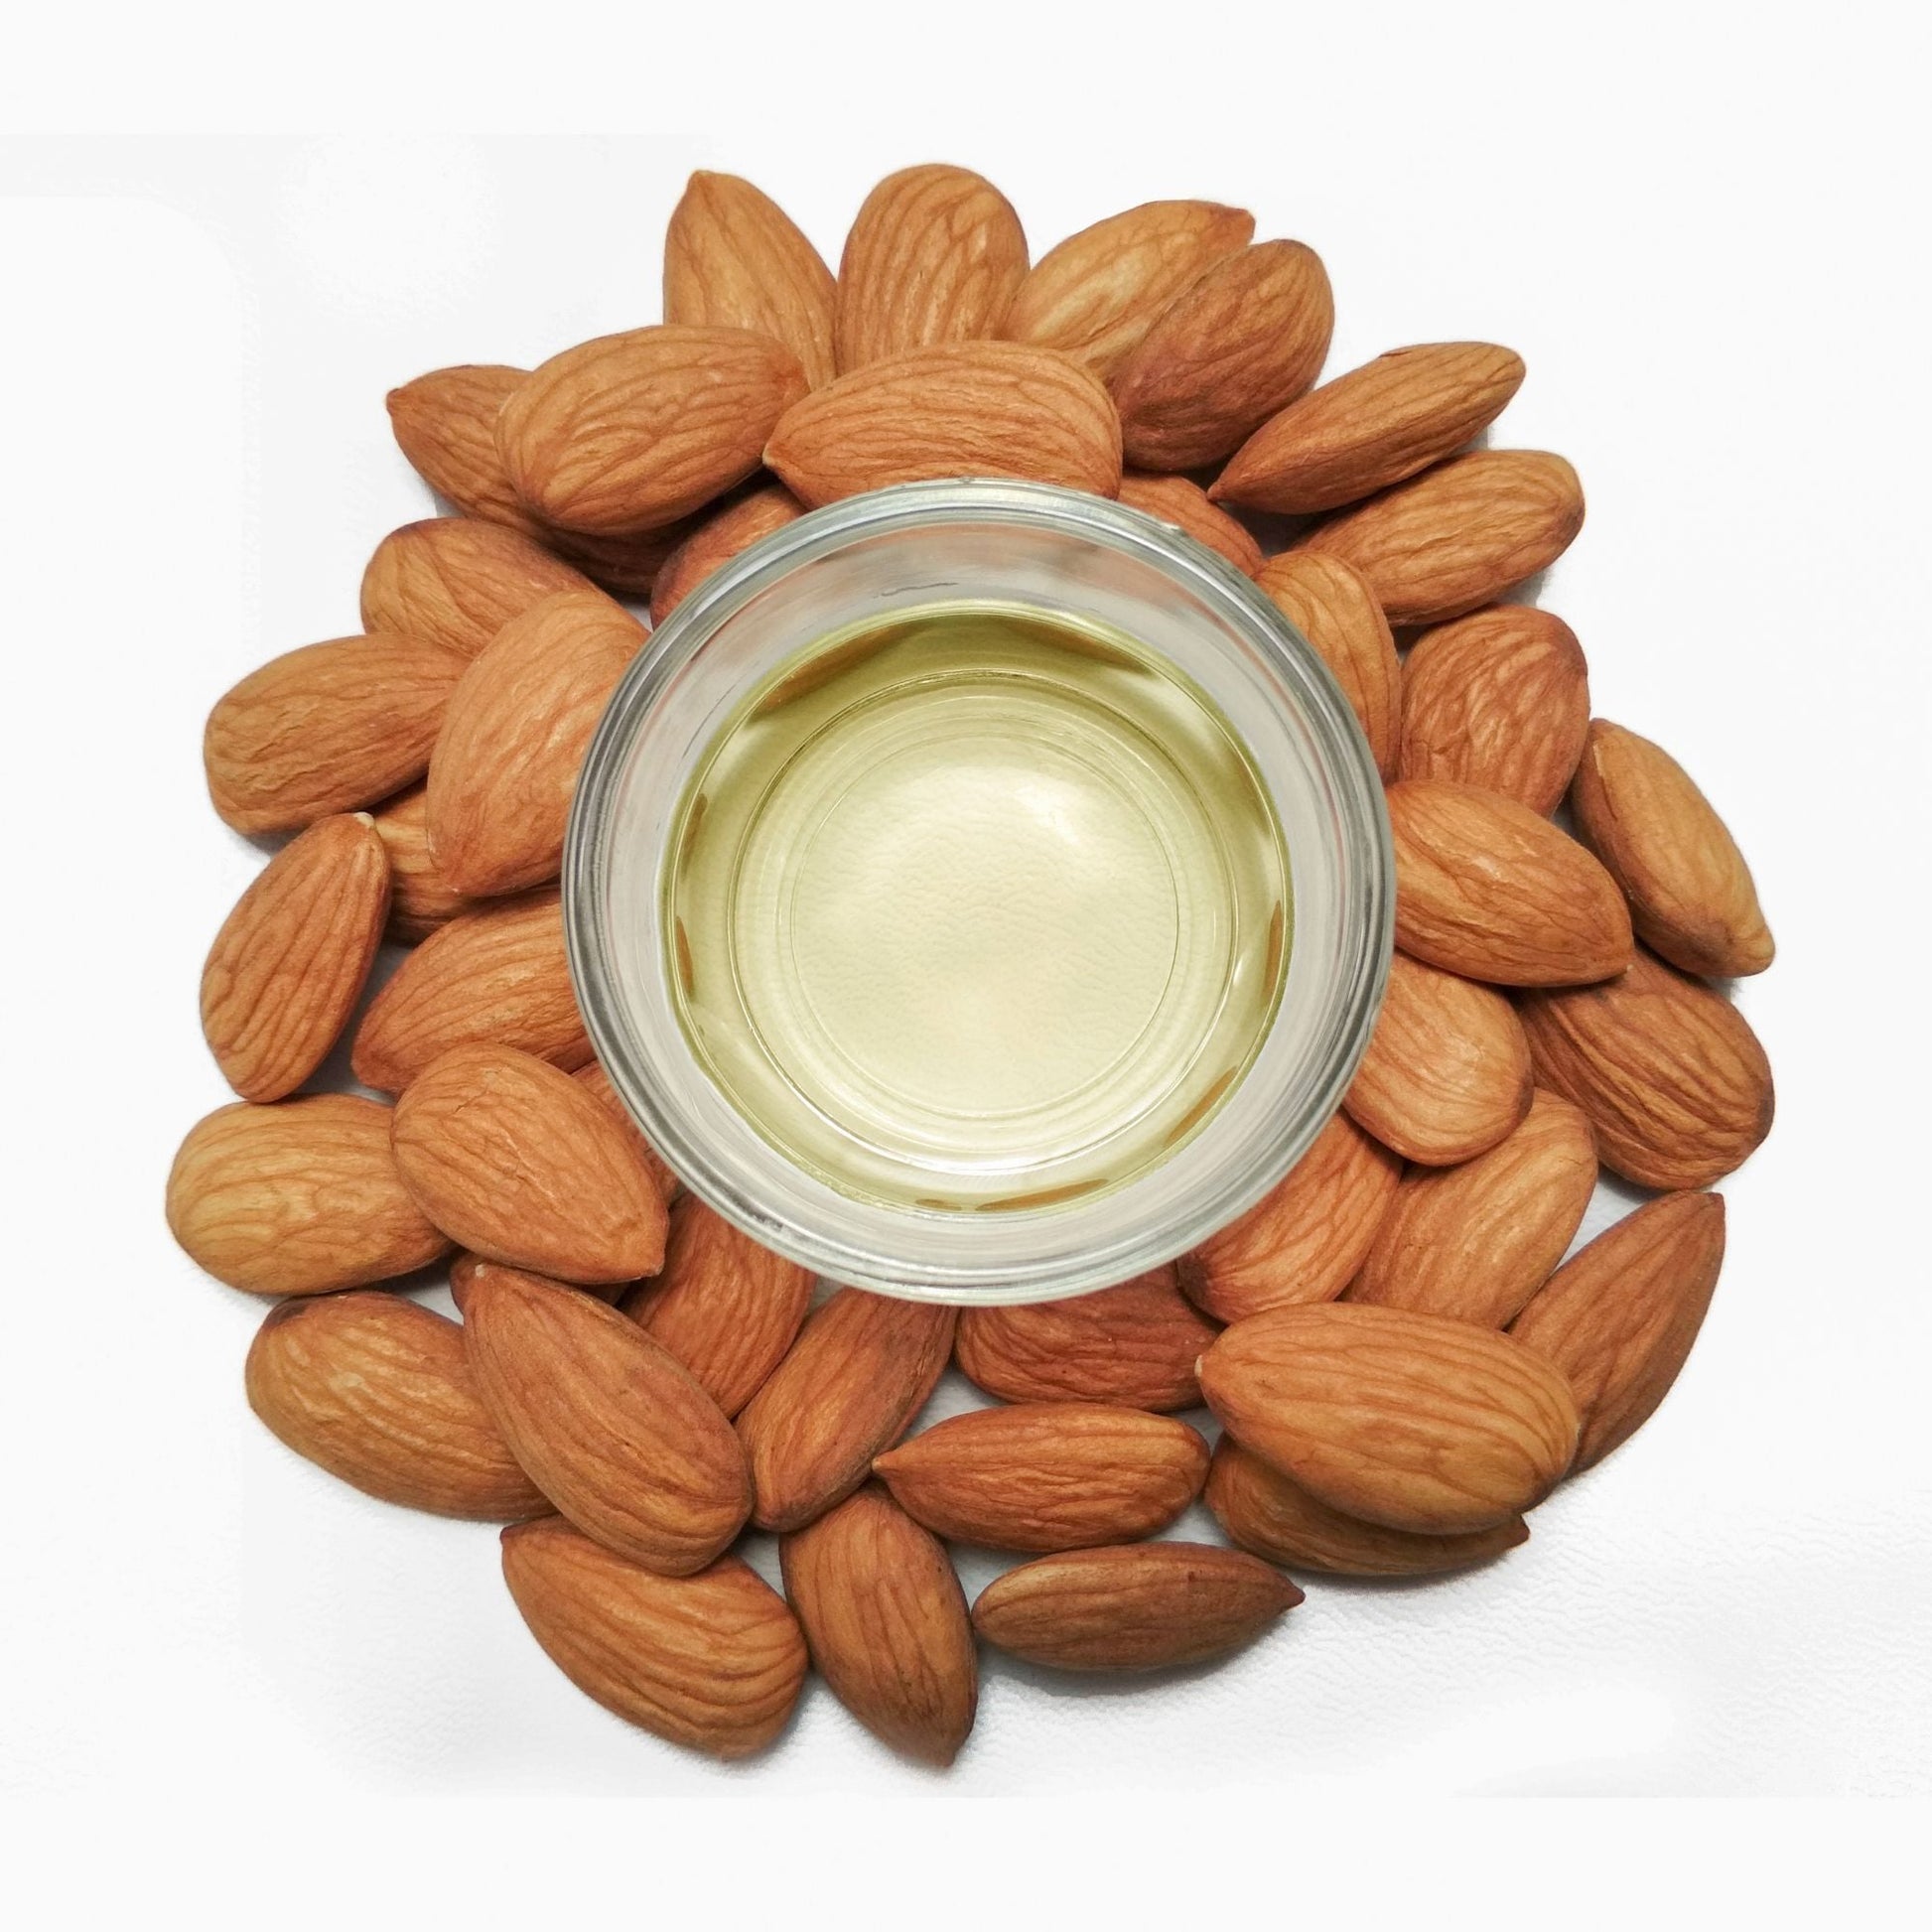 1L Sweet Almond Oil Refined Cosmetic Grade 100% Pure - Skin Face Hair Massage